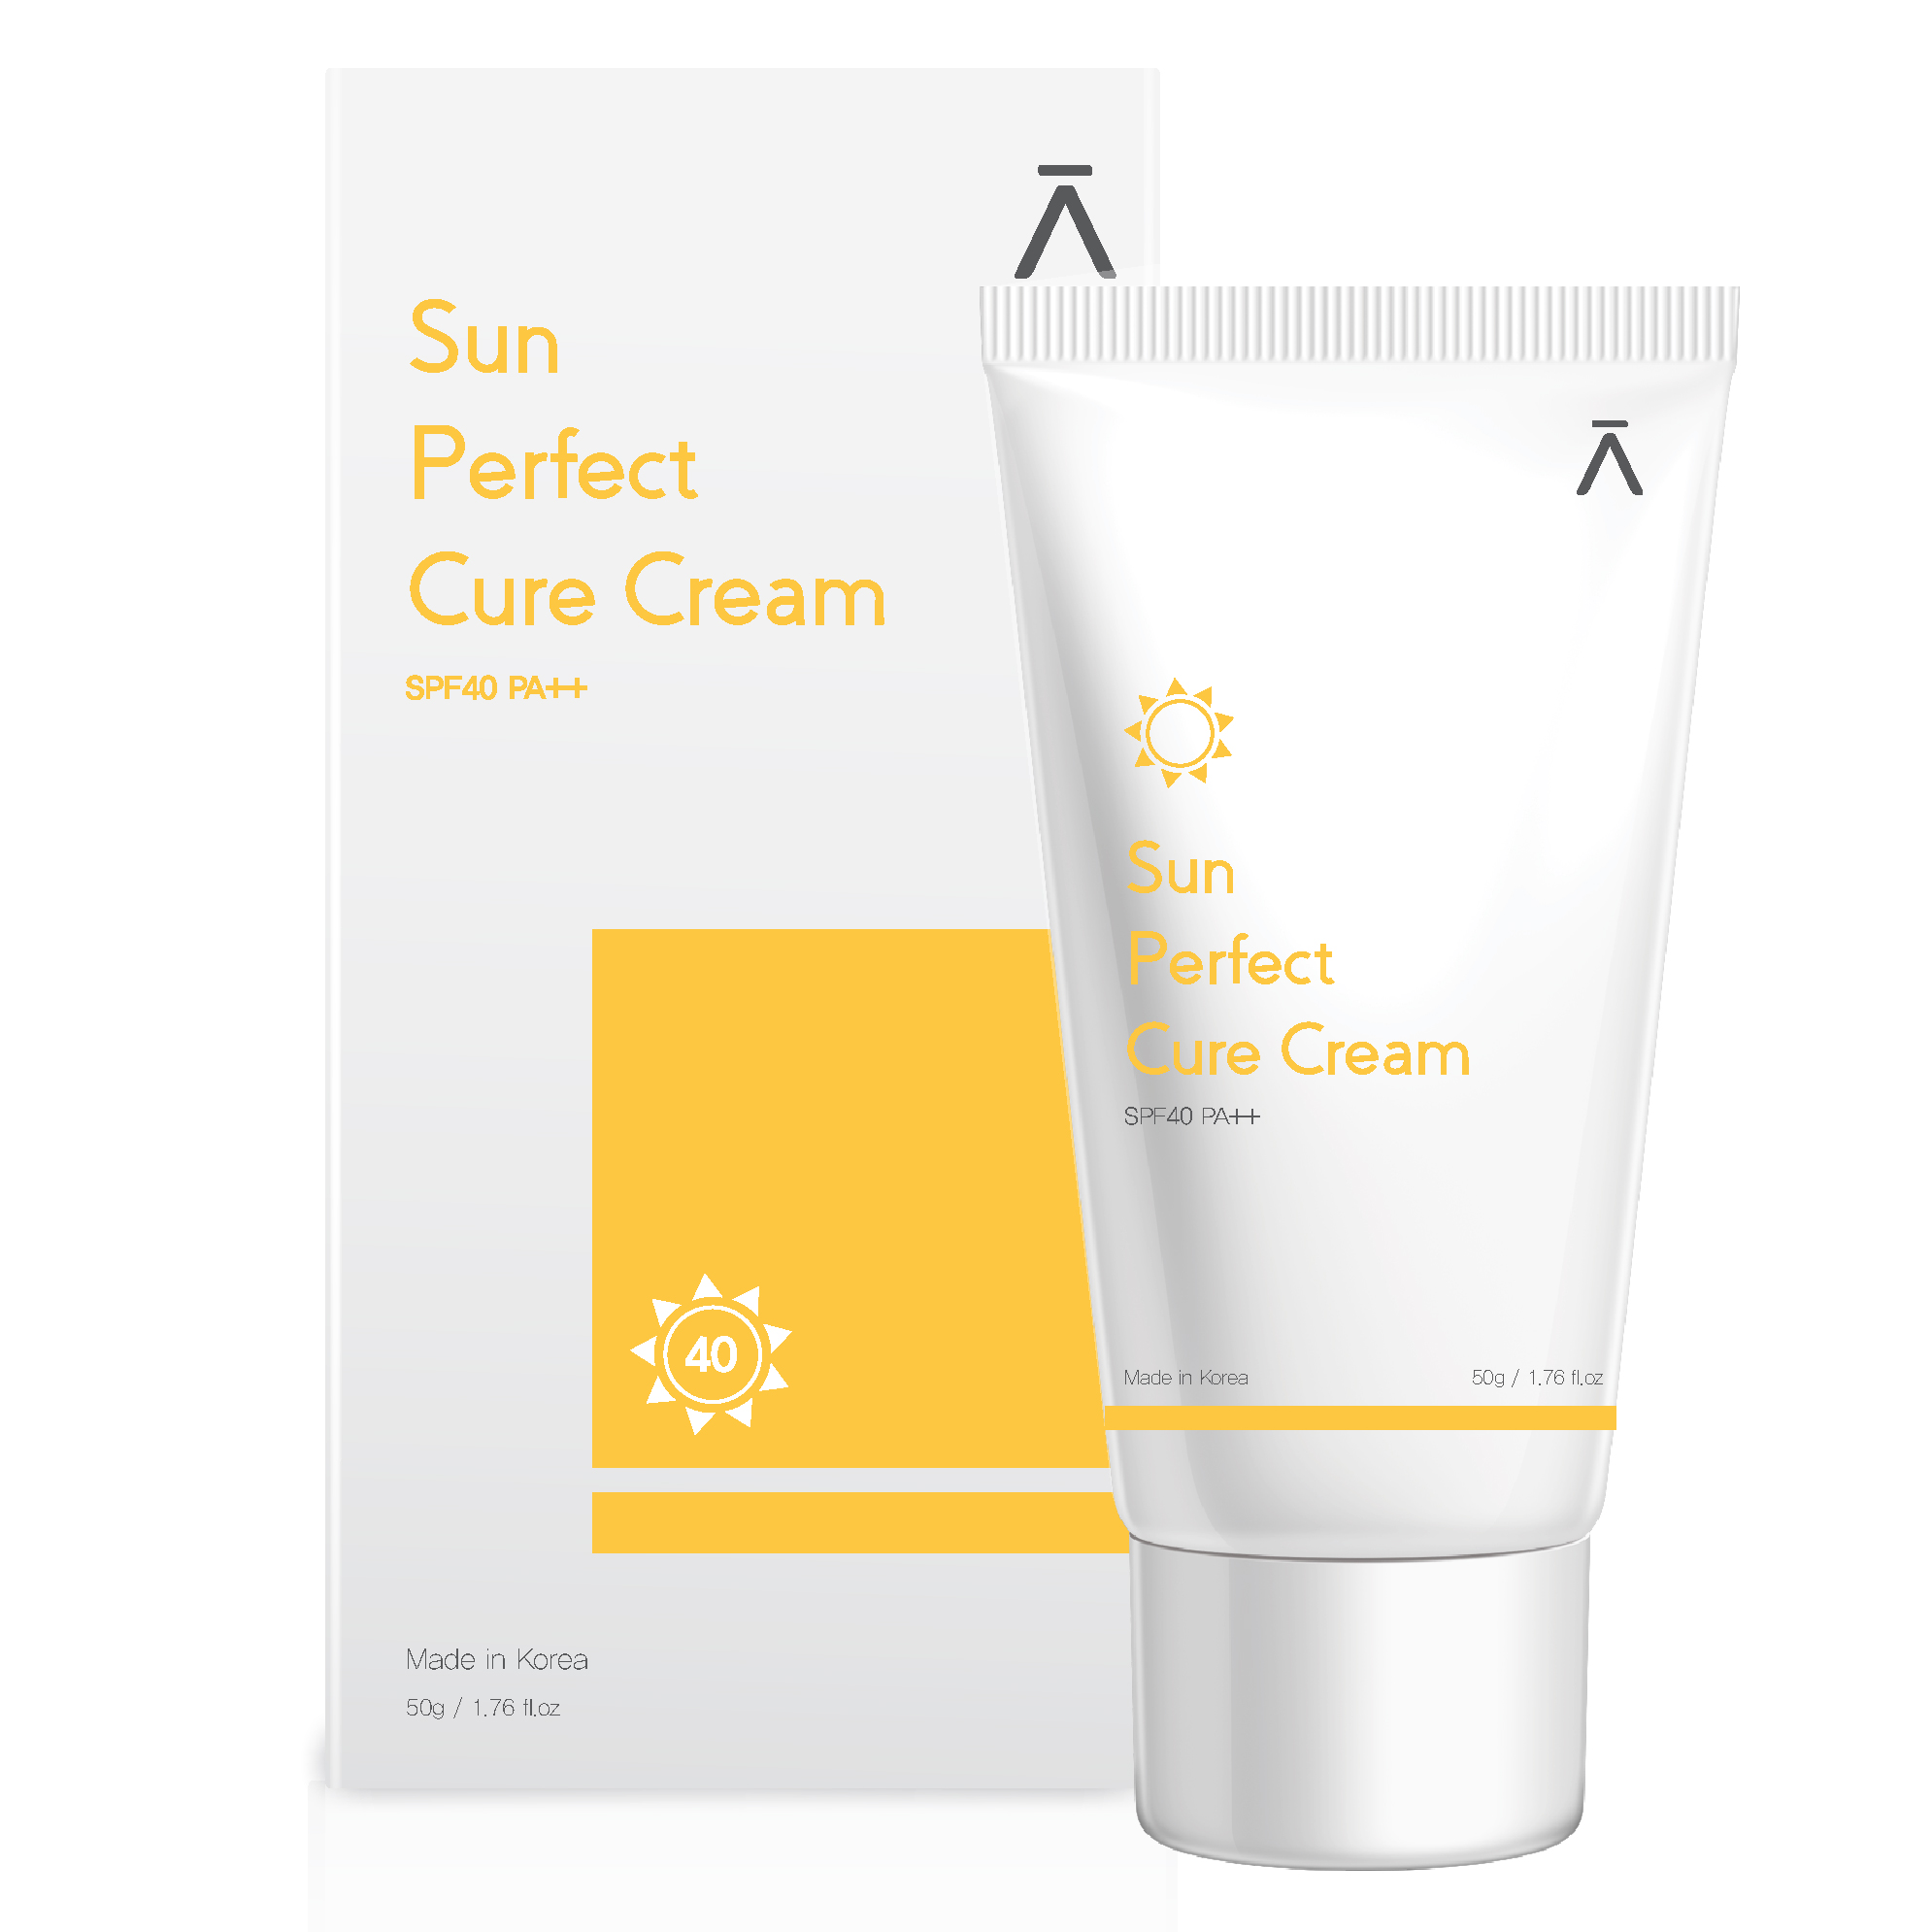 Sun Perfect Cure Cream Sun Protection by Dermabell Basic